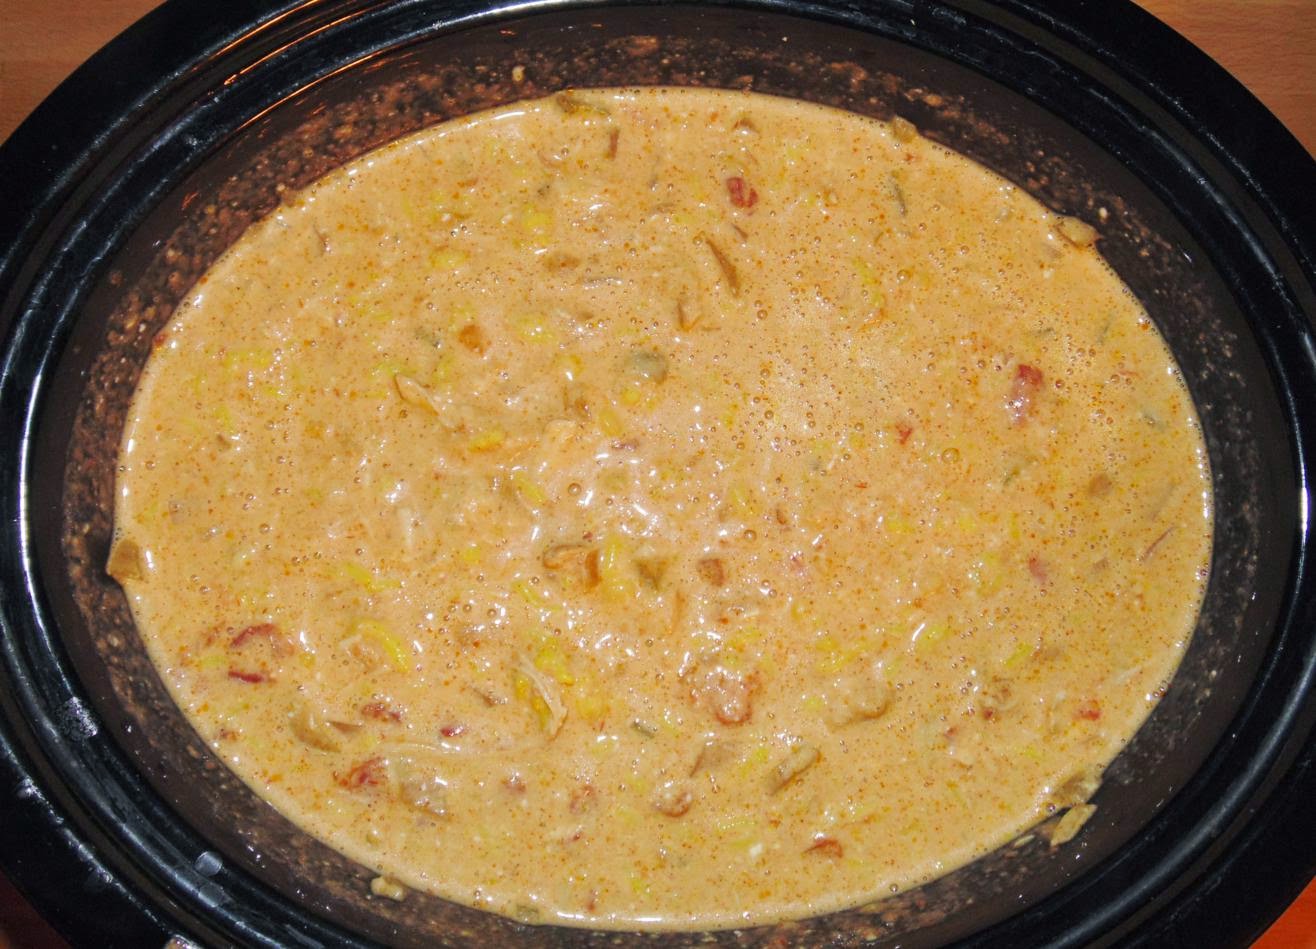 Cookin' It Up In Texas: Villalobos Pollo Loco Soup- Updated and Revised